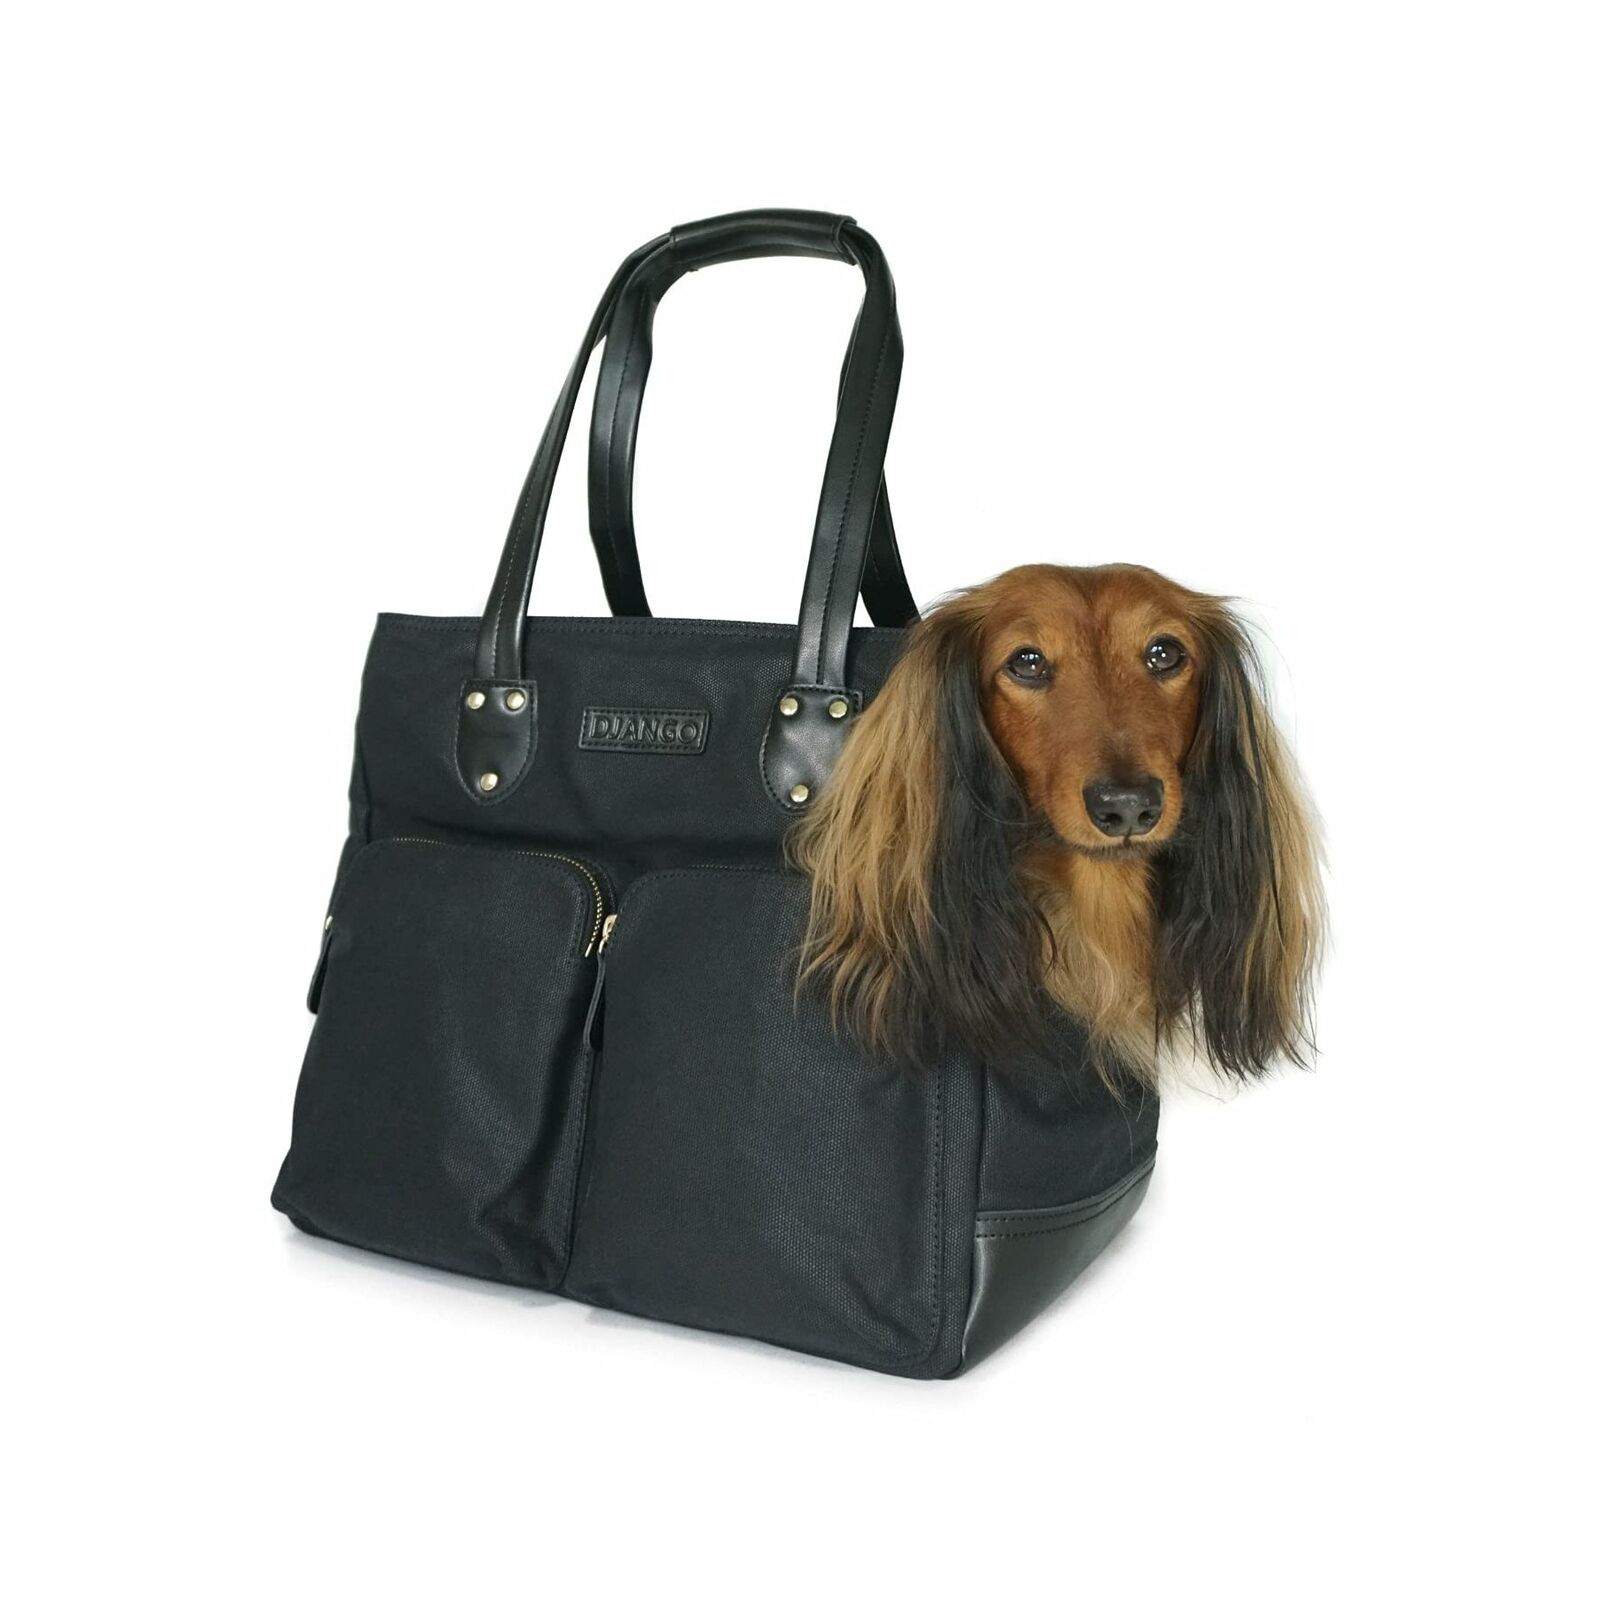 DJANGO Dog Carrier Bag - Waxed Canvas and Leather Soft-Sided Pet Travel Tote ...